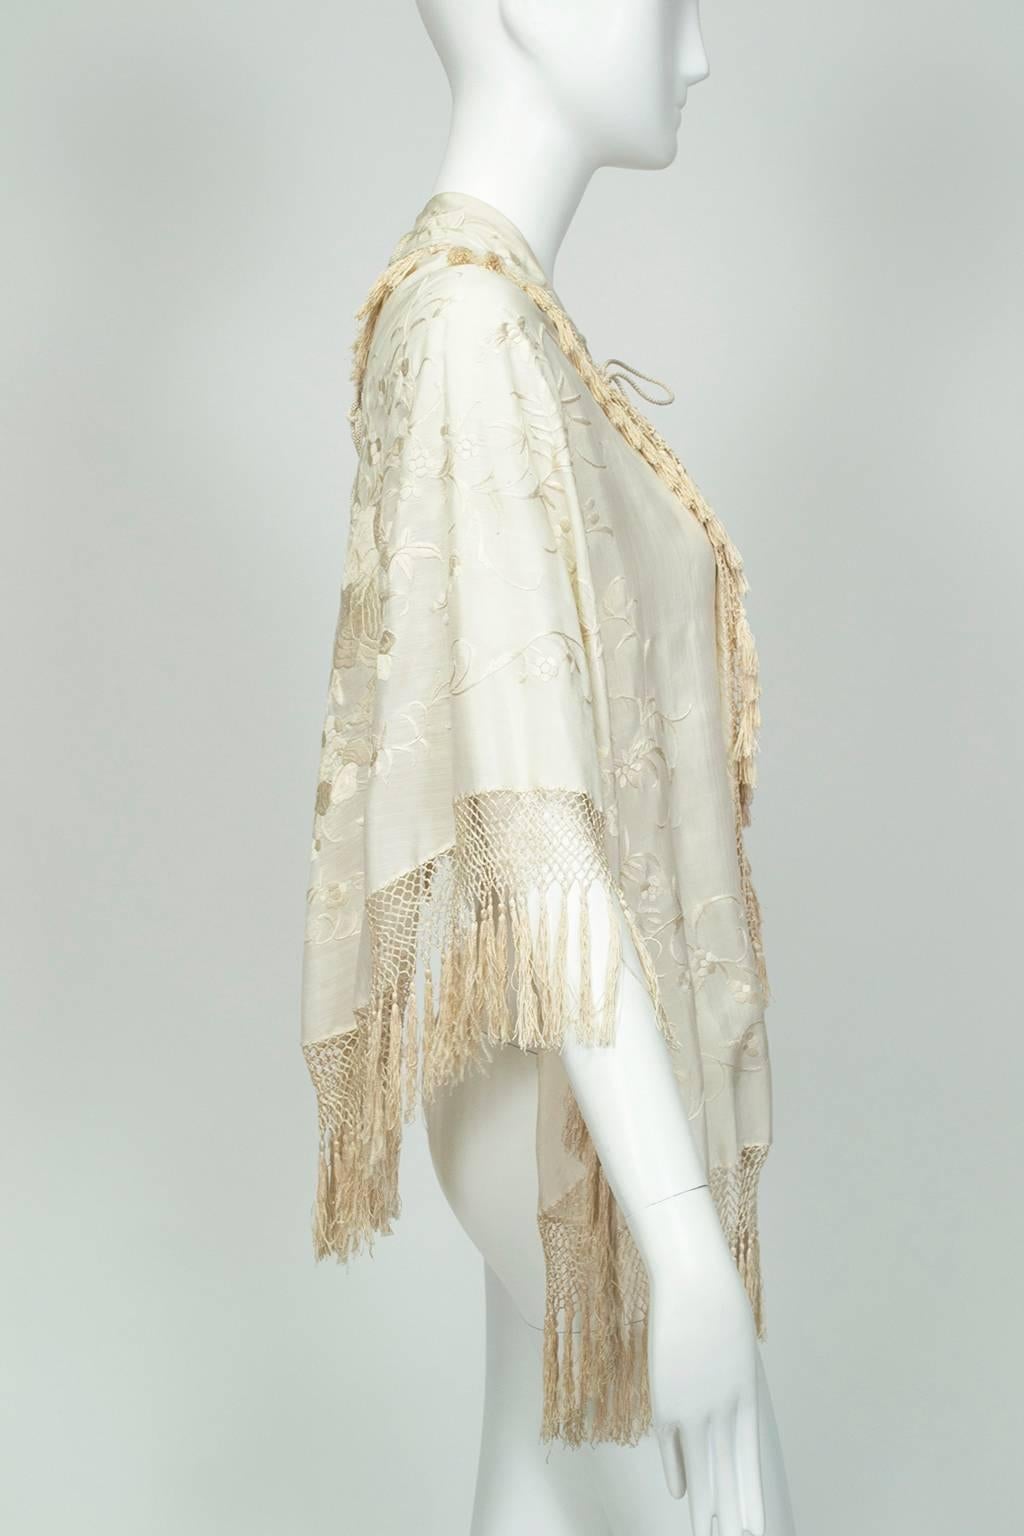 A breathtaking piece of history, this ethereal shawl is an ideal garment to represent “something (really) old” at the wedding, and short enough to be worn as a layering piece for years afterward; it even looks smart worn backwards! Unworn since its